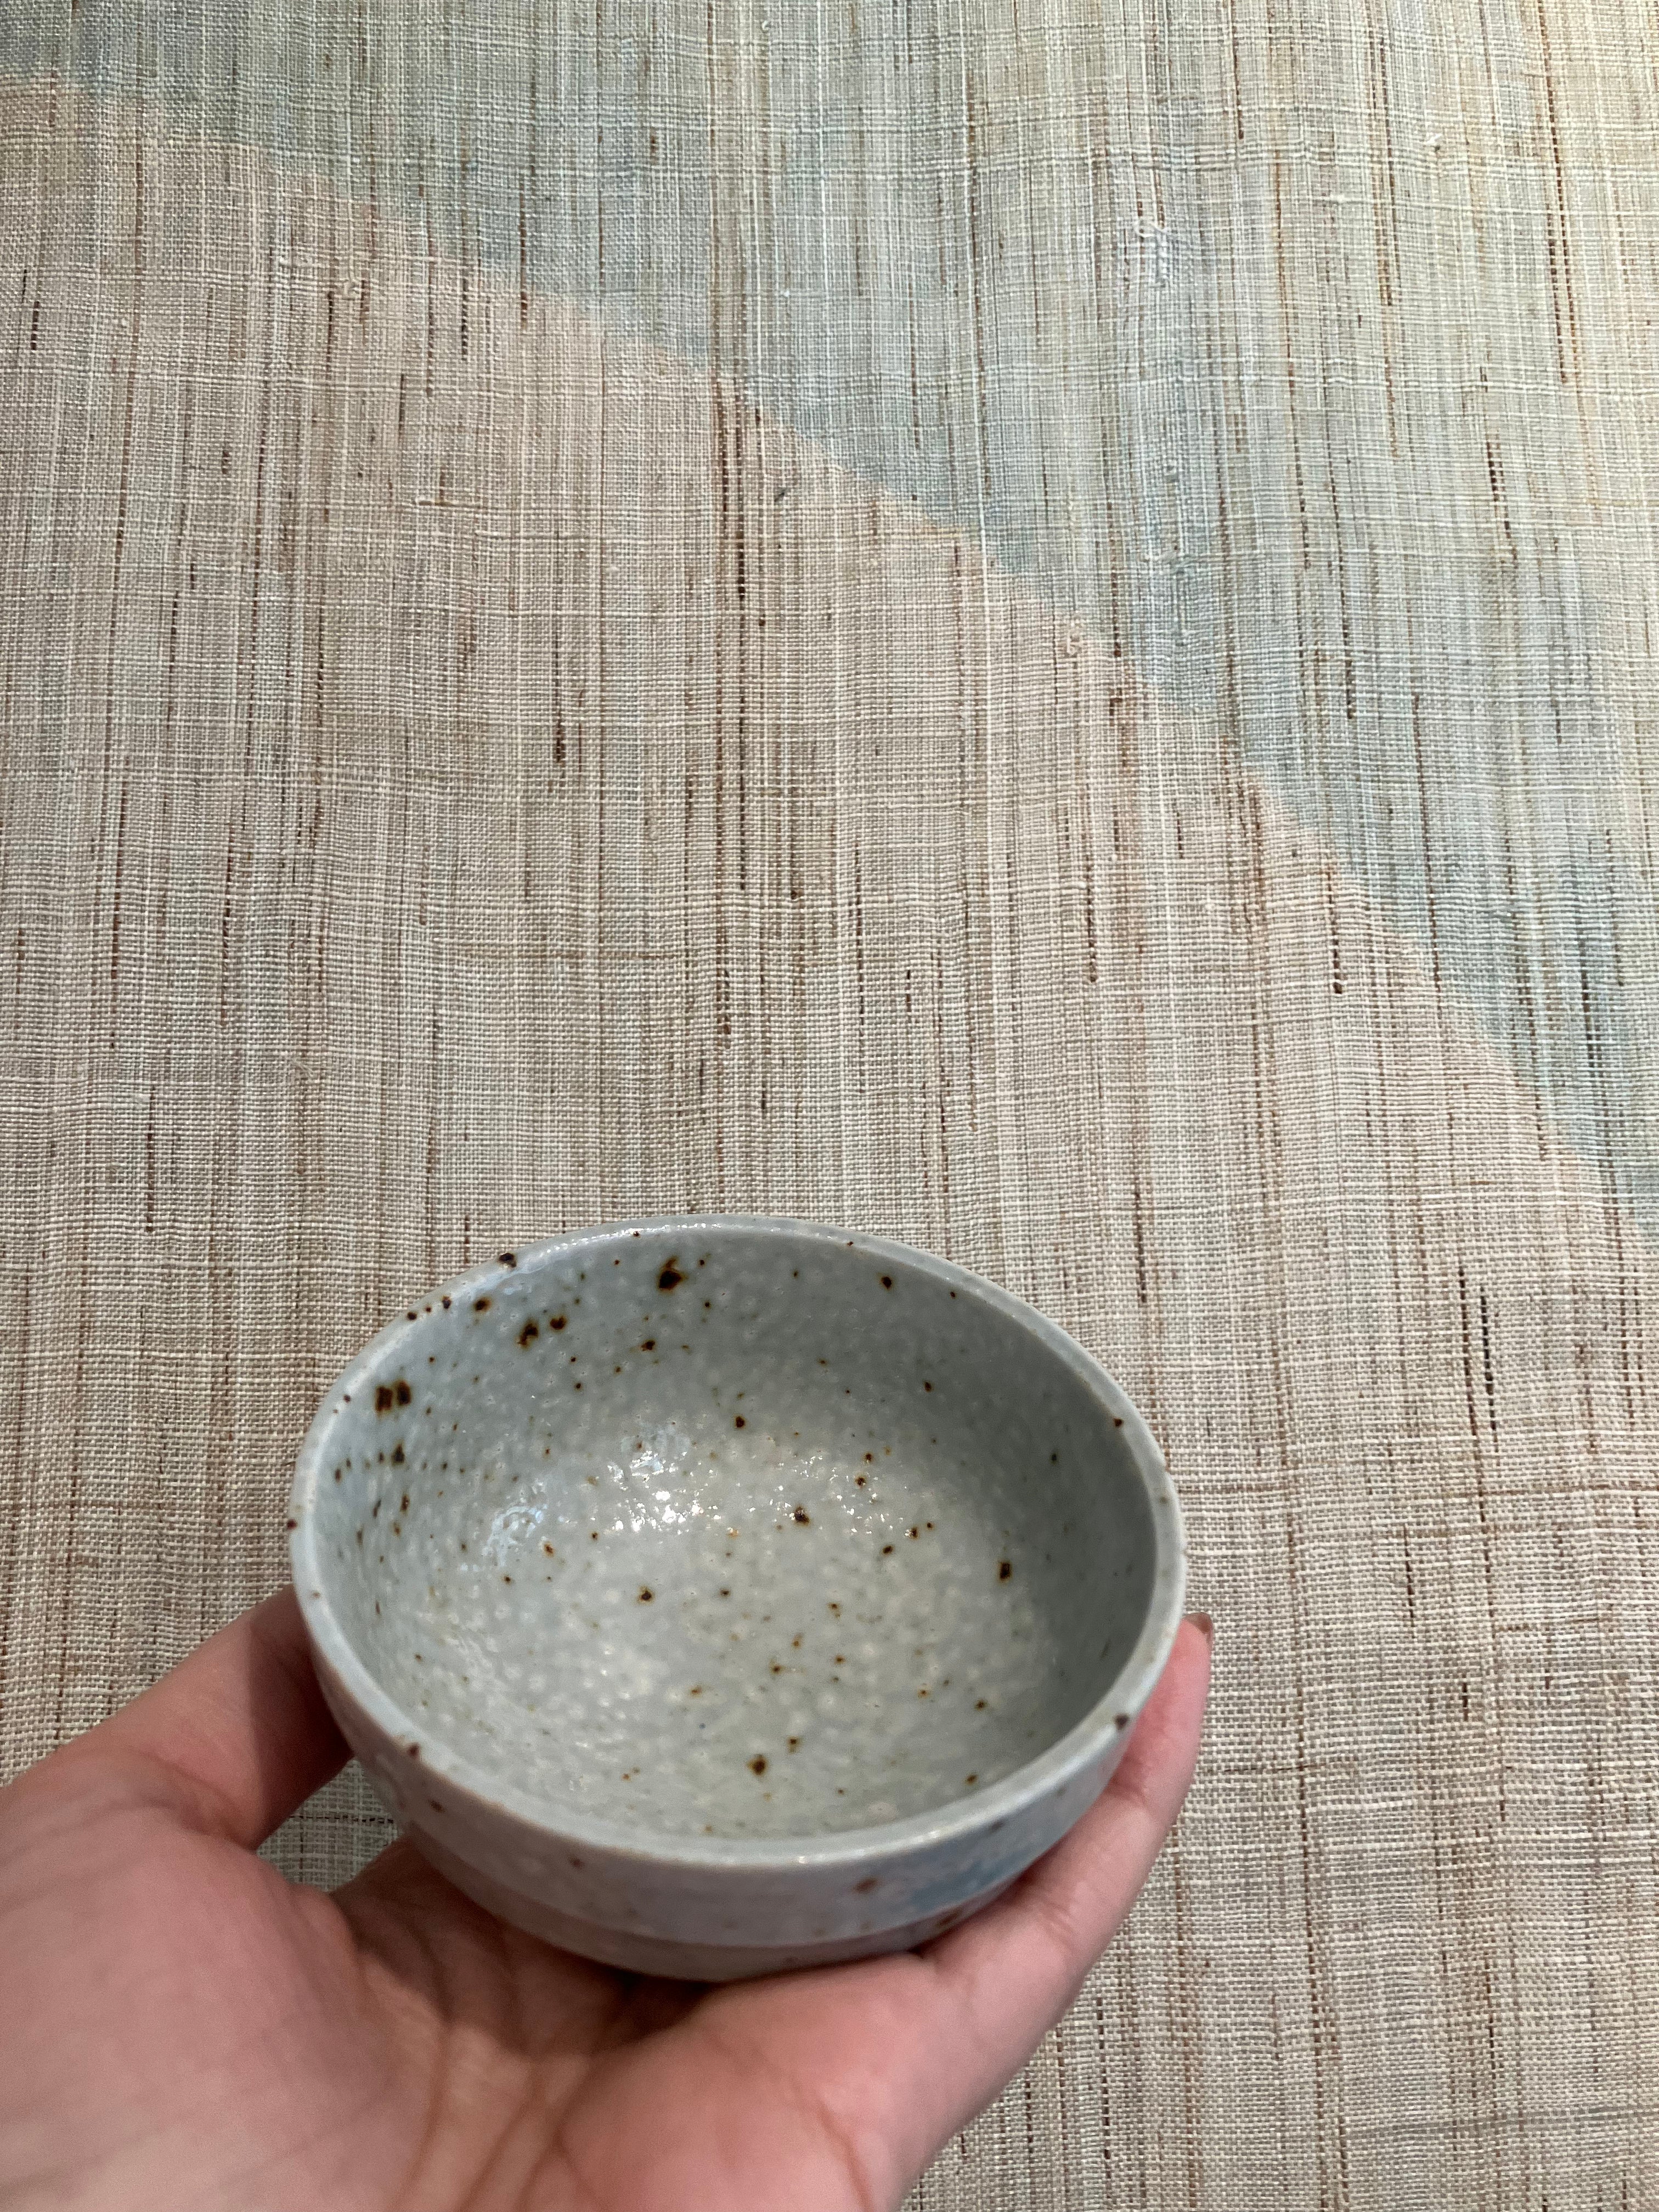 Small bowl with blue-grey glaze and brown dots